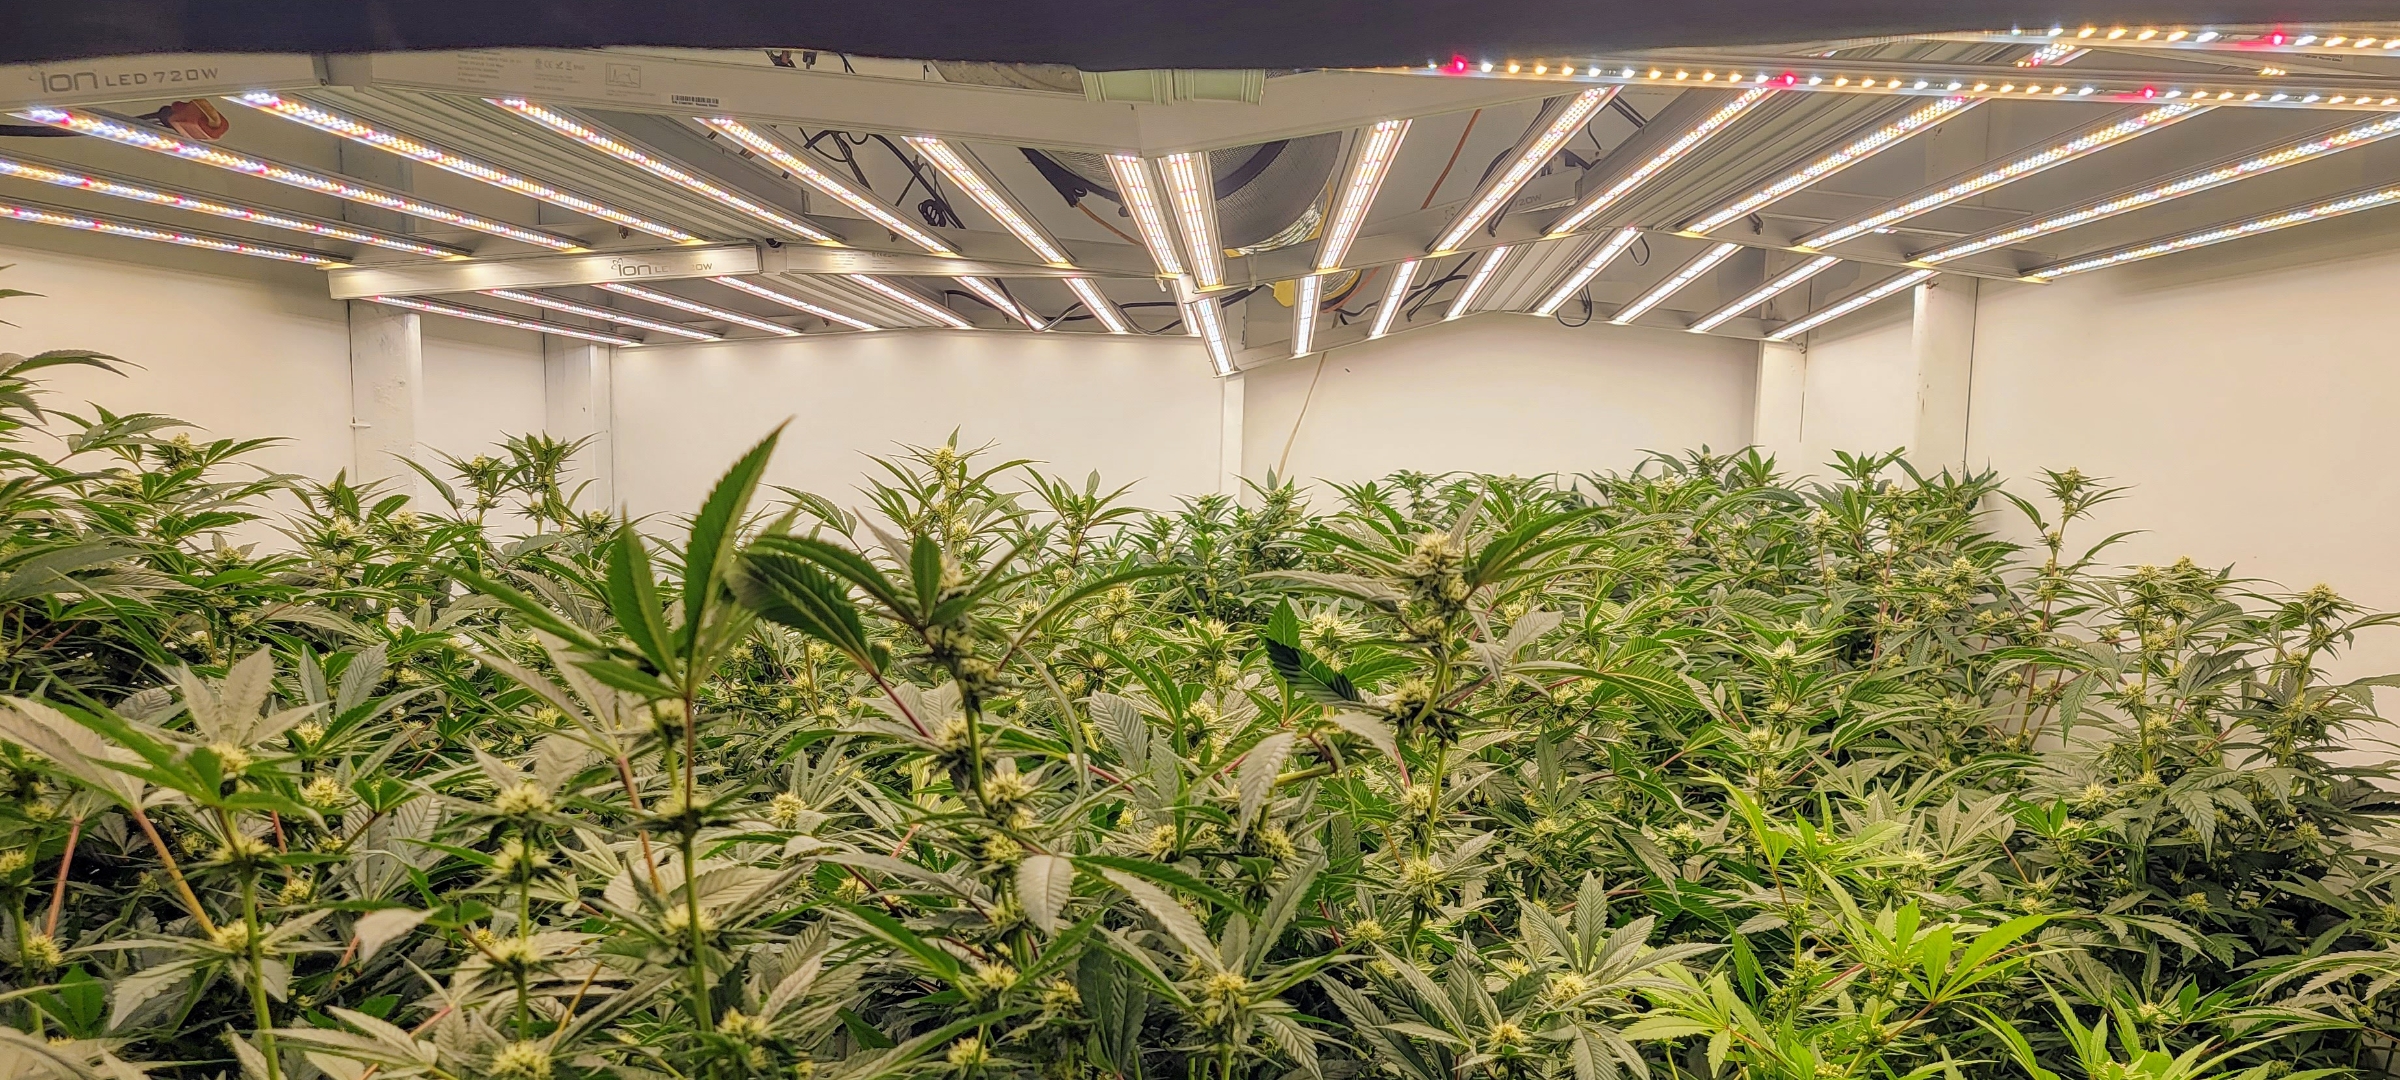 What kind of light is better for high yield cannabis: LEDs or HPS